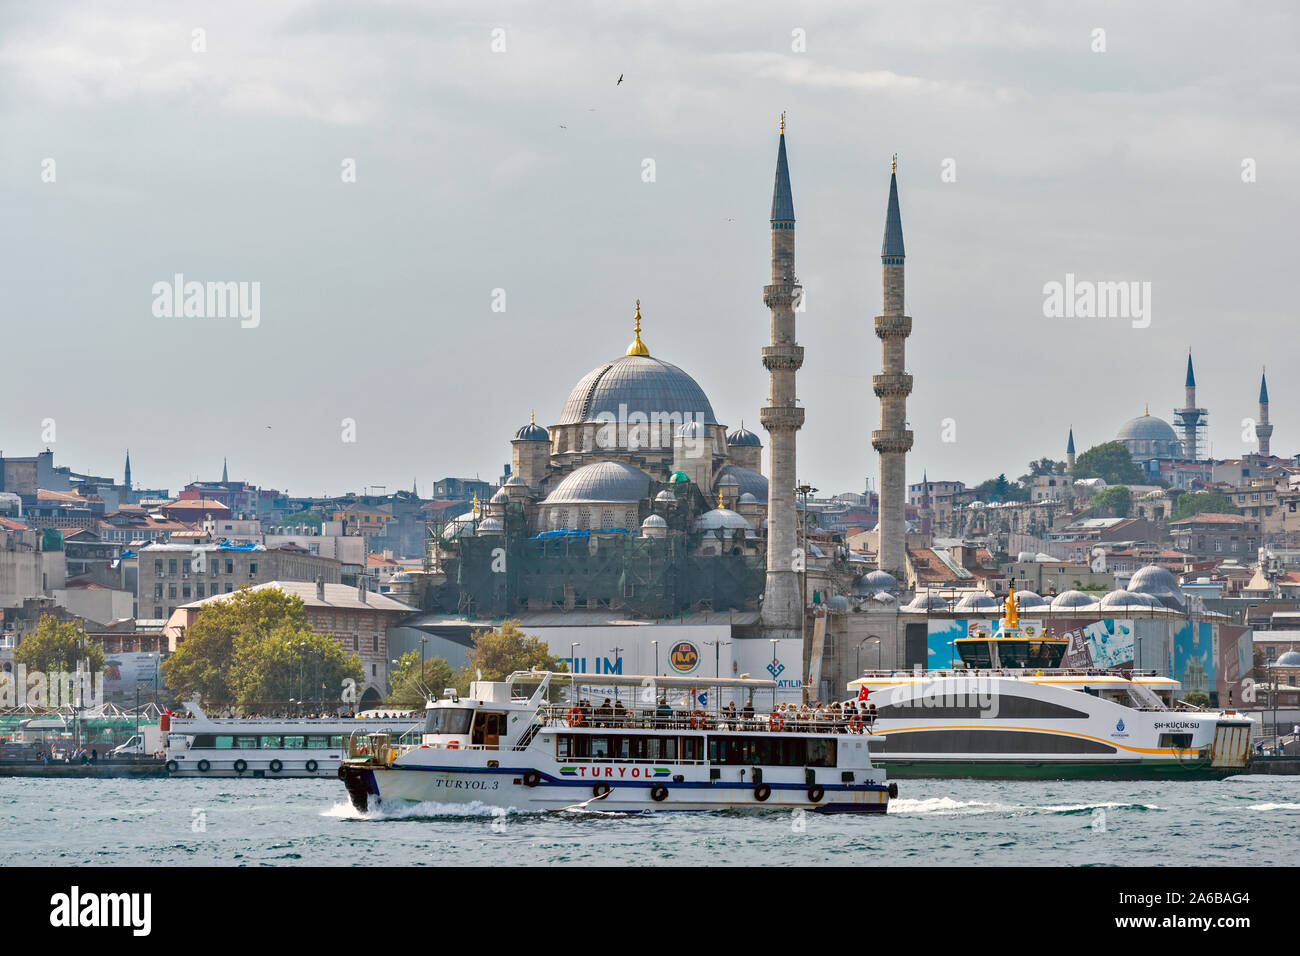 ISTANBUL TURKEY PASSENGER BOATS ON THE BOSPHORUS WITH THE SULEYMANIYE MOSQUE IN THE BACKGROUND Stock Photo